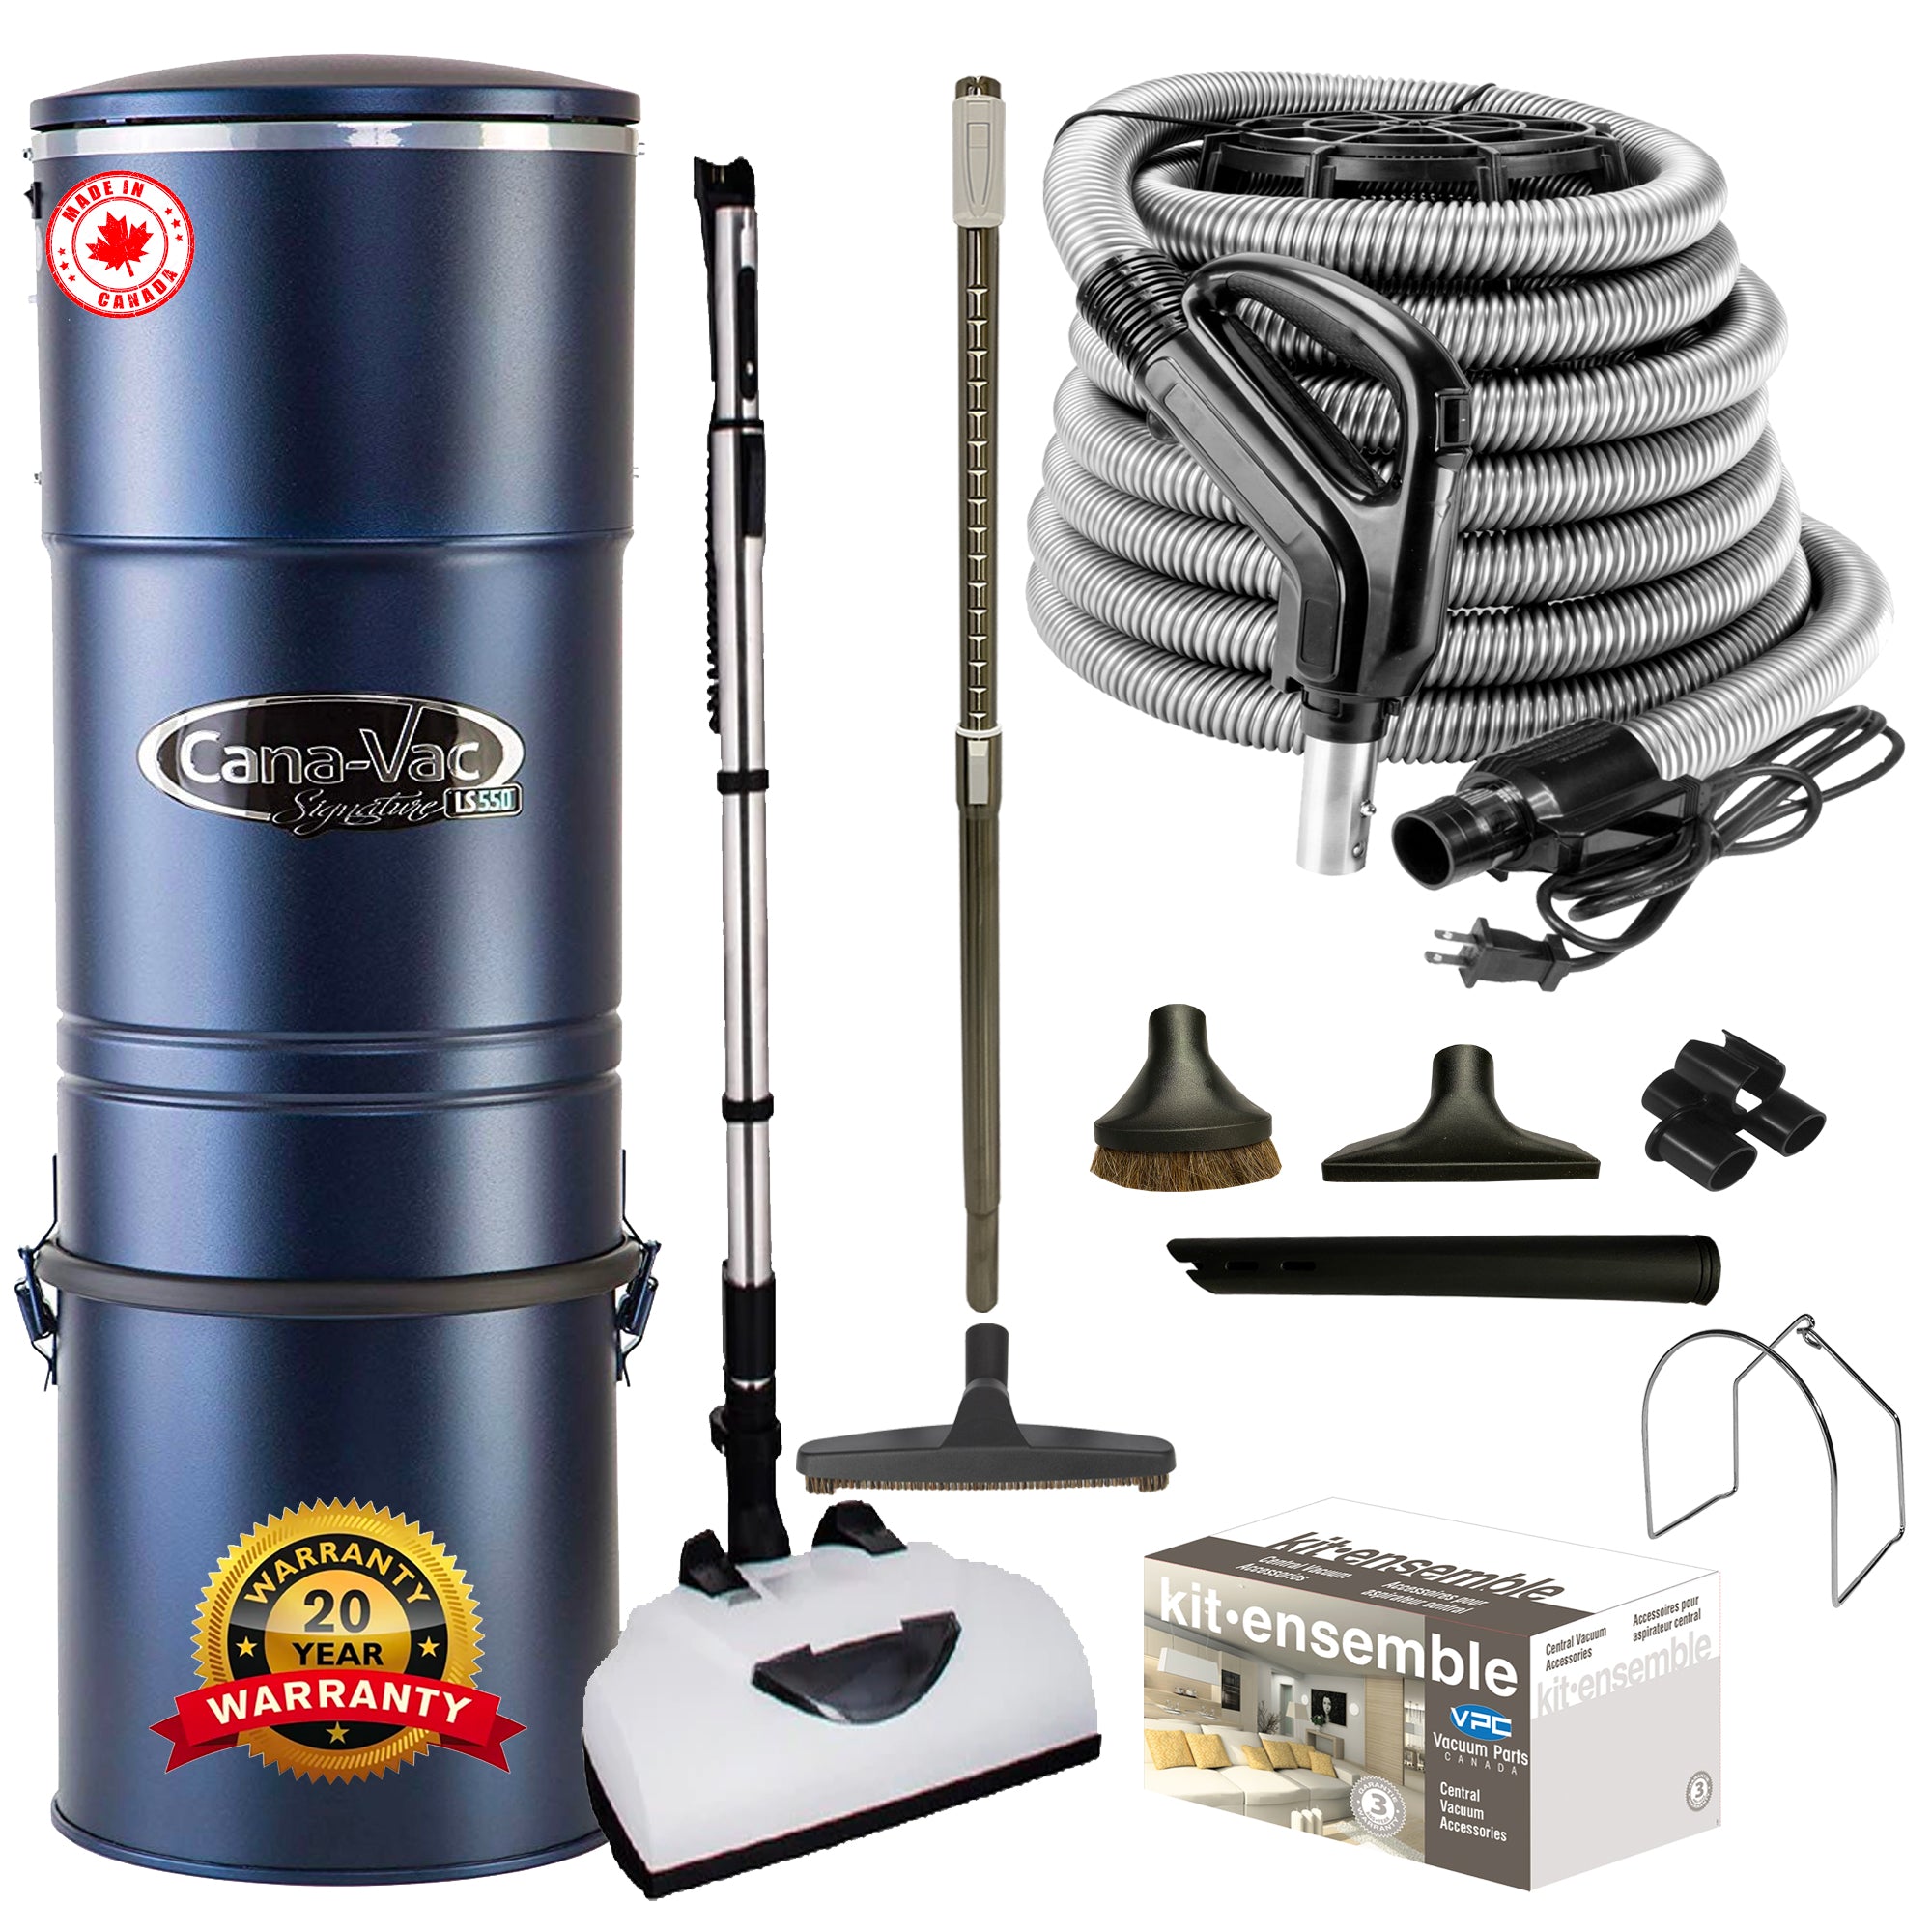 Cana-Vac LS590 Central Vacuum with Deluxe Electric Package (Black)